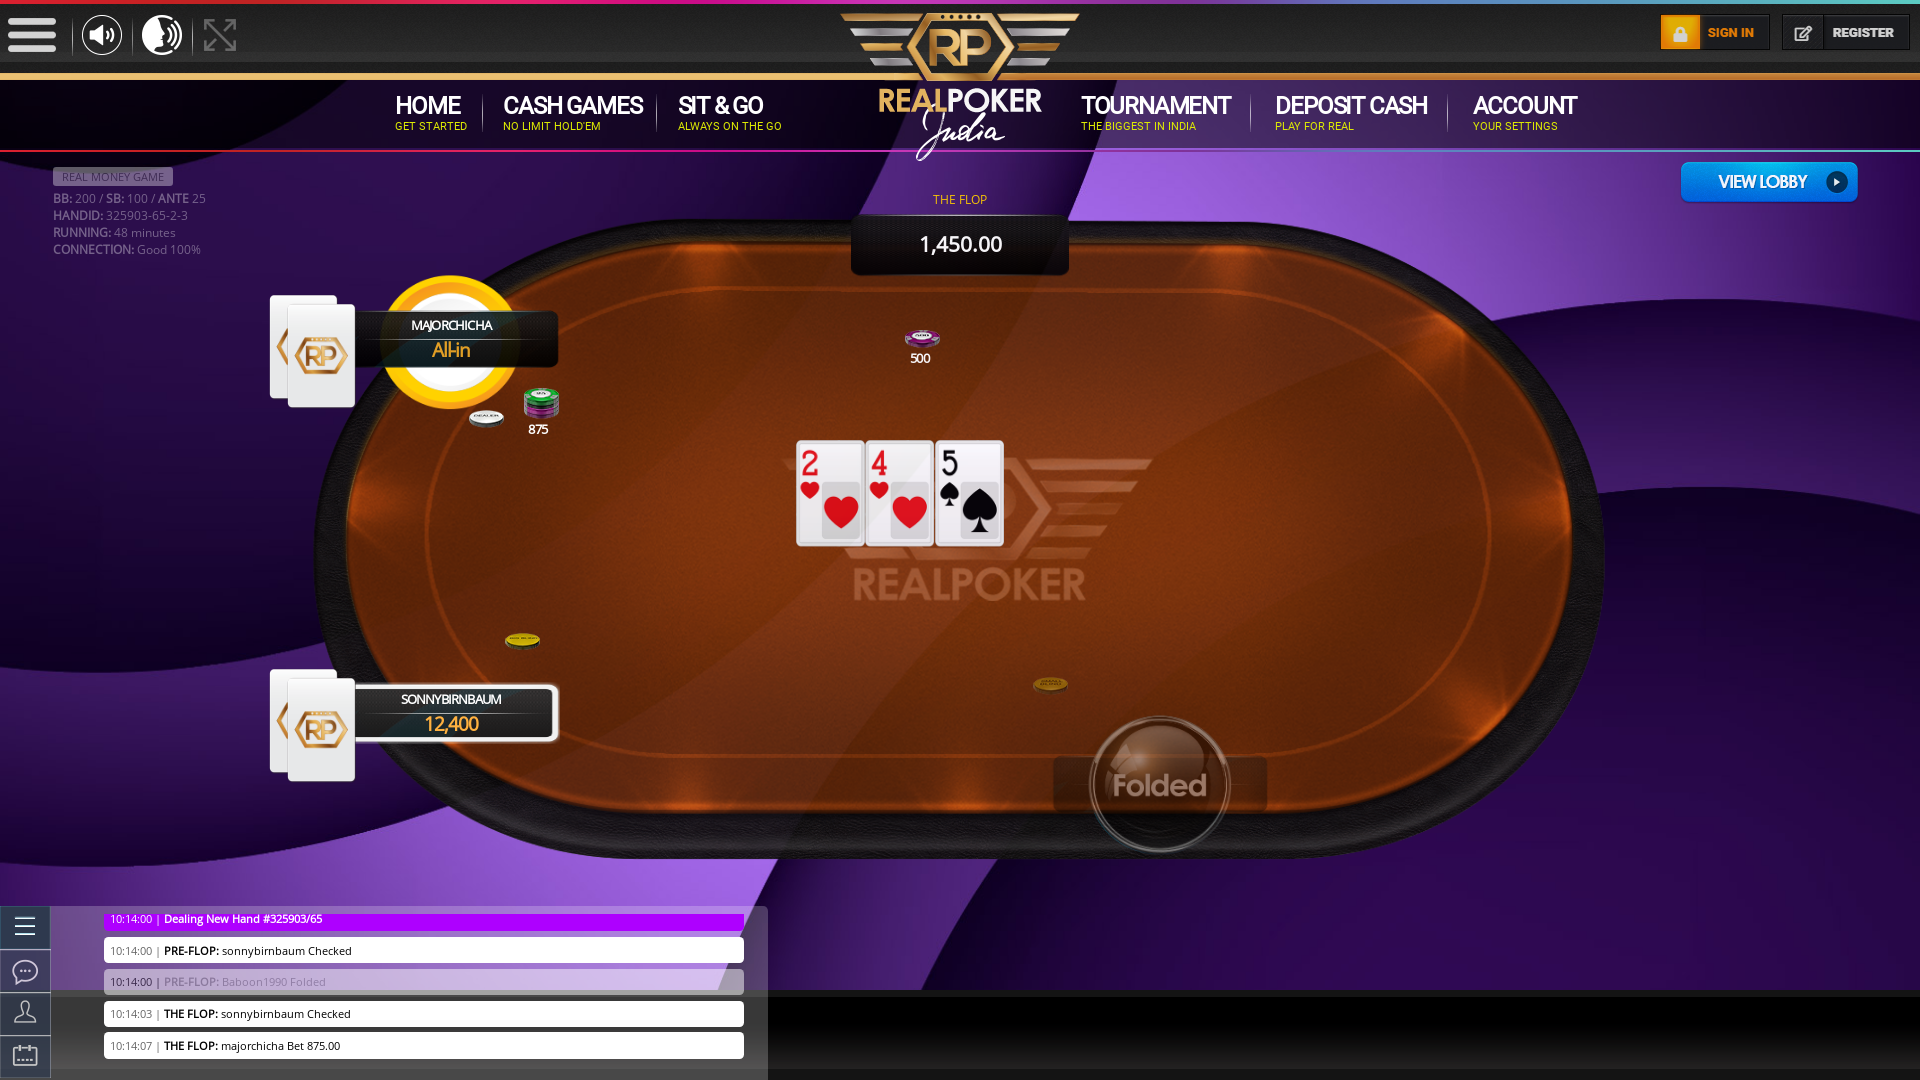 Real poker 10 player table in the 48th minute